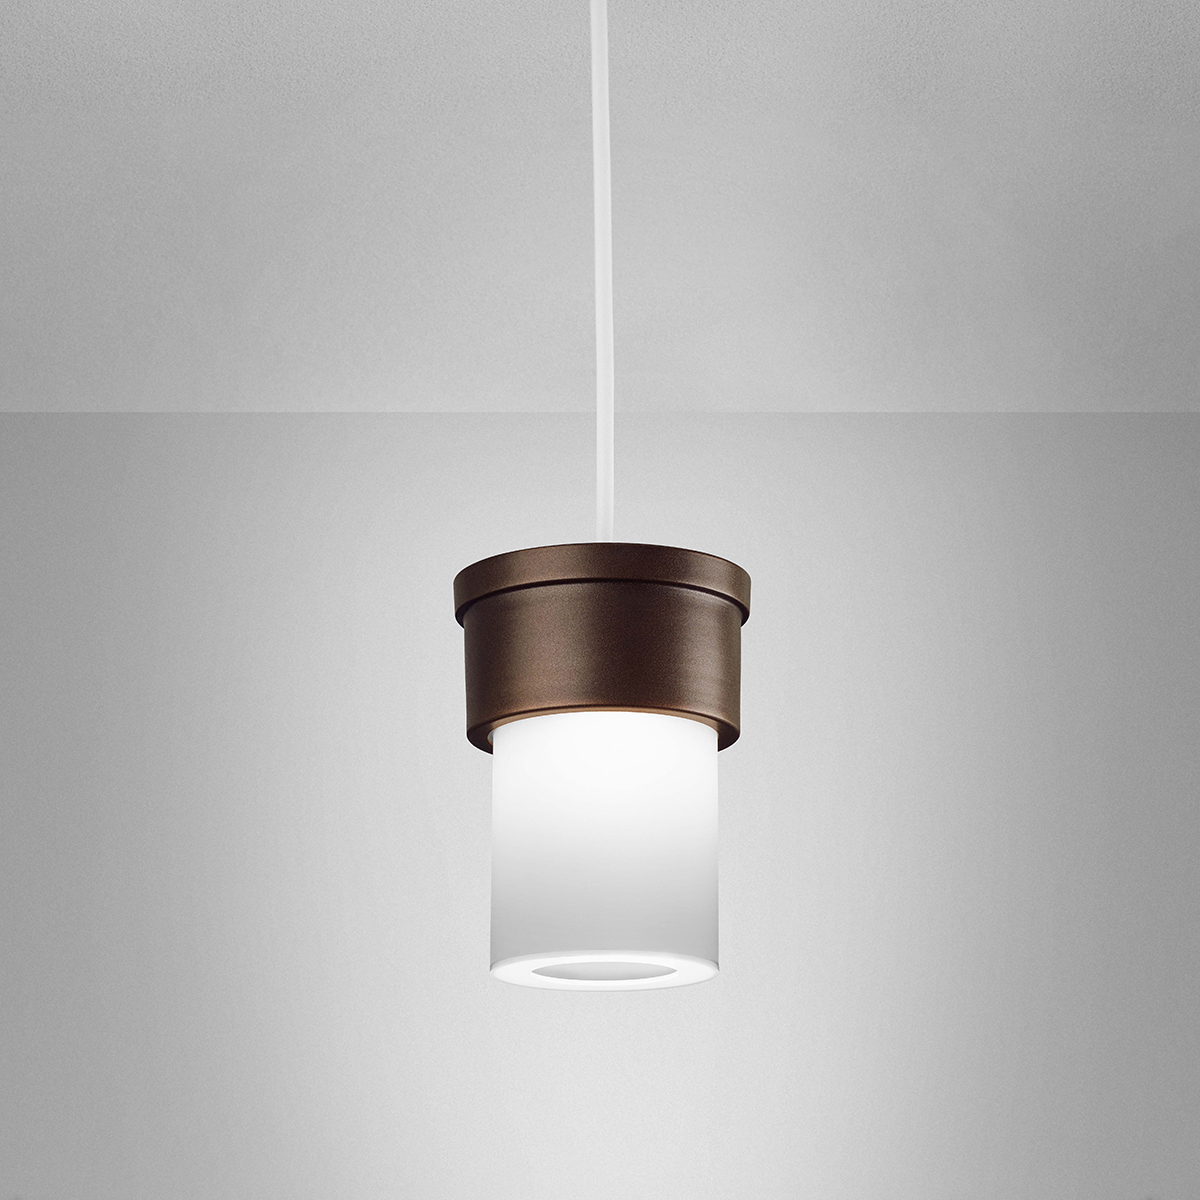 A small, luminous cylinder pendant with a solid base